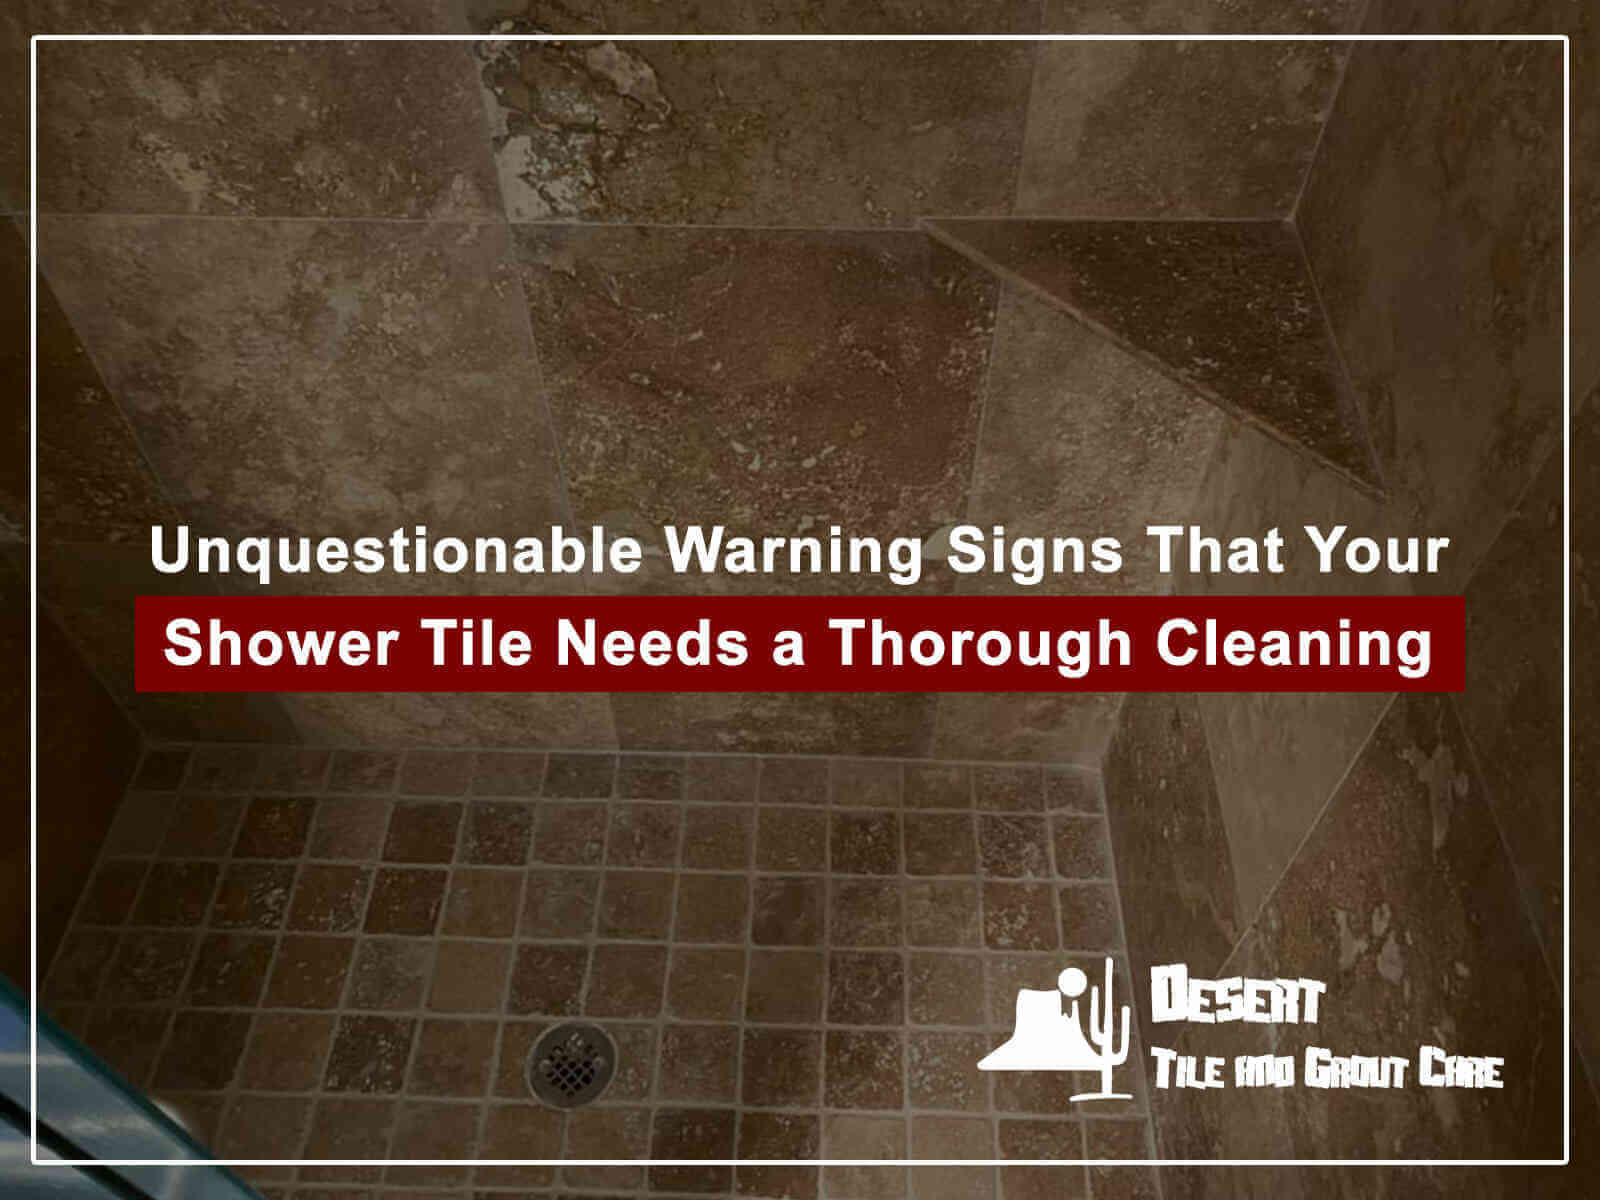 Unquestionable Warning Signs That Your Shower Tile Needs a Thorough Cleaning